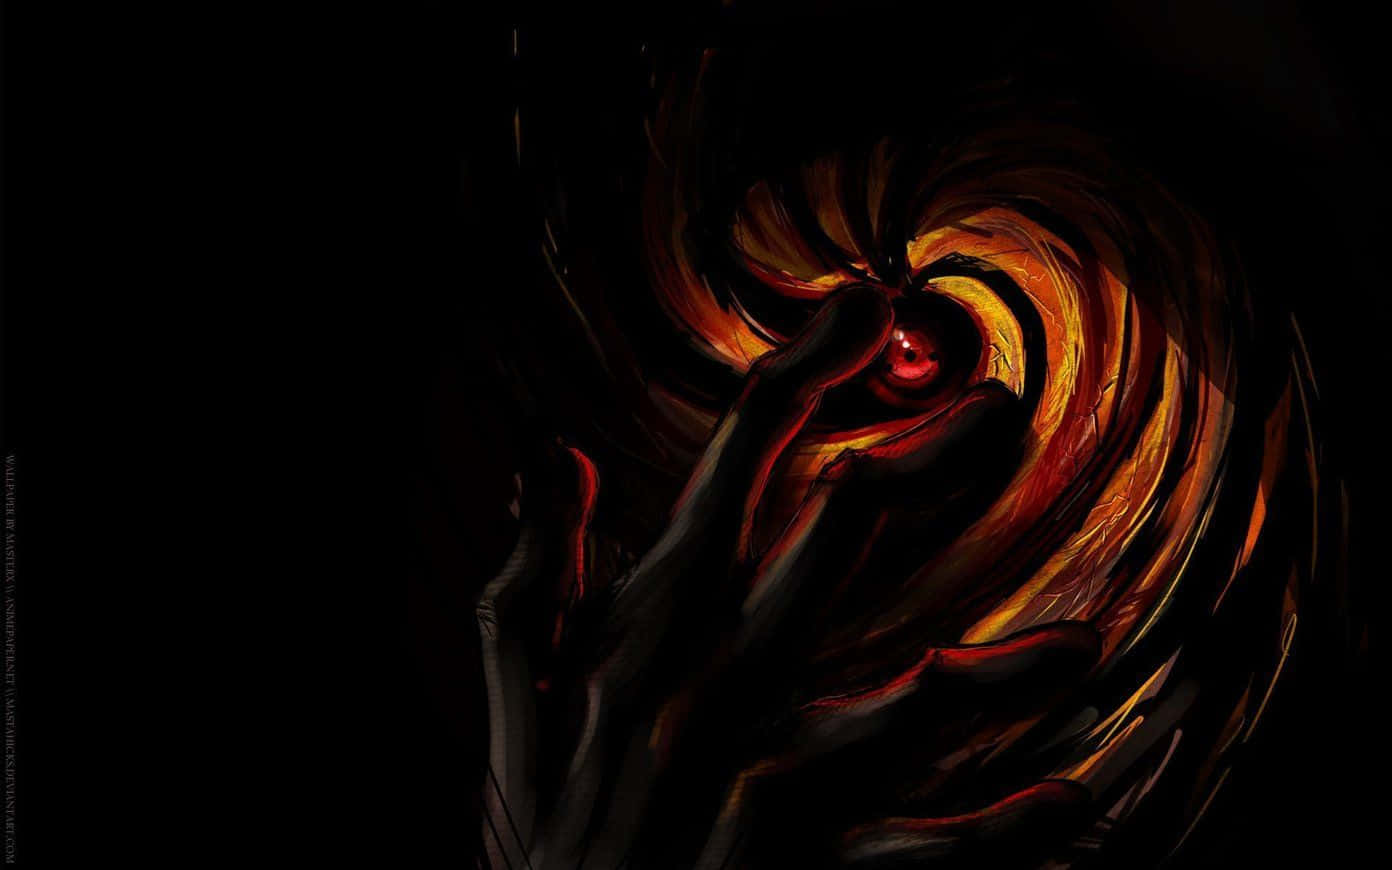 "The Power of the Nine Tails Lives Within Me" Wallpaper